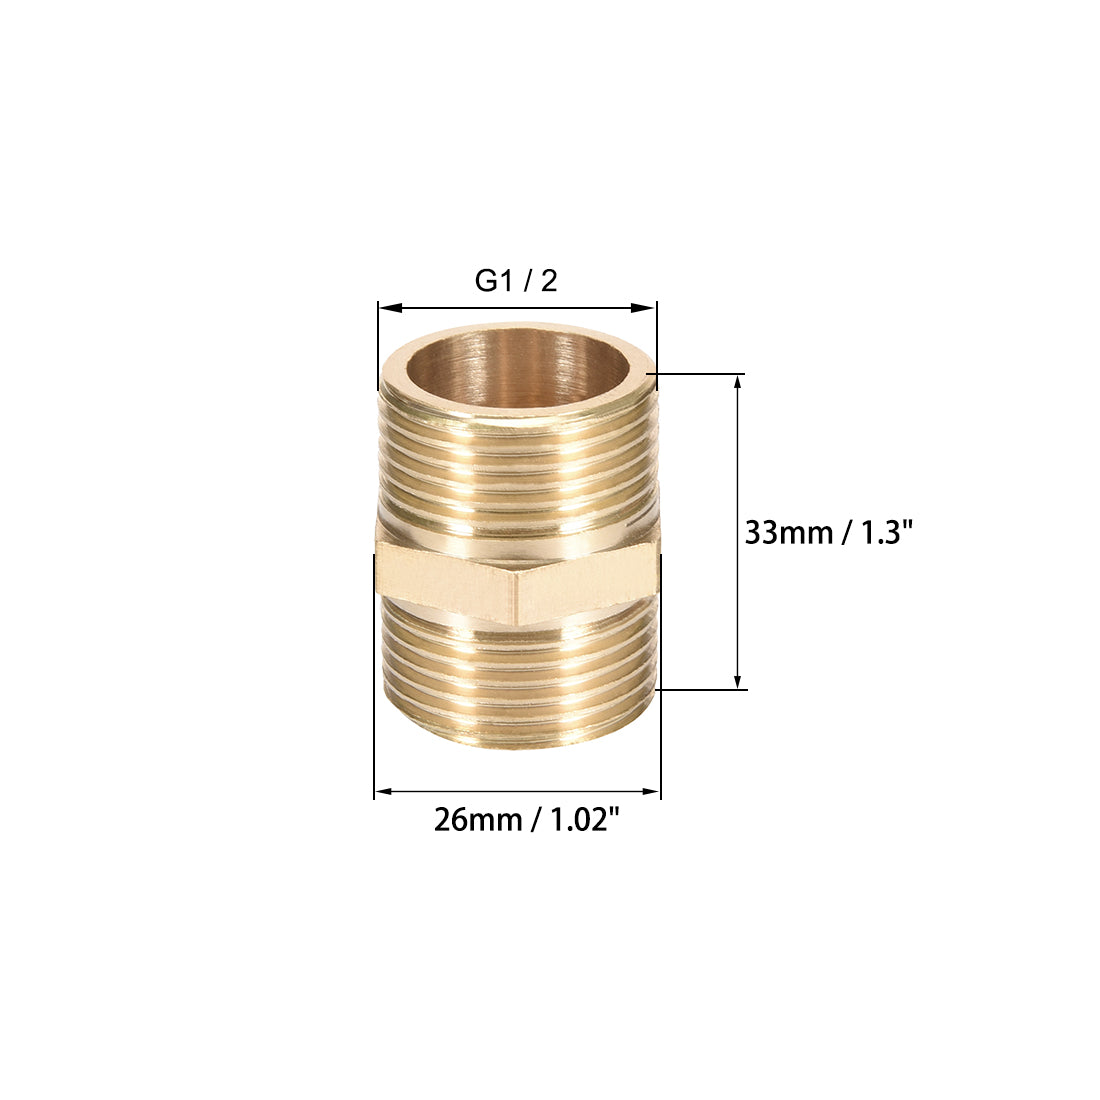 uxcell Uxcell Brass Pipe Fitting Connector Straight Hex Nipple Coupler 3/4 x 3/4 G Male Thread Hose Fittings Gold Tone